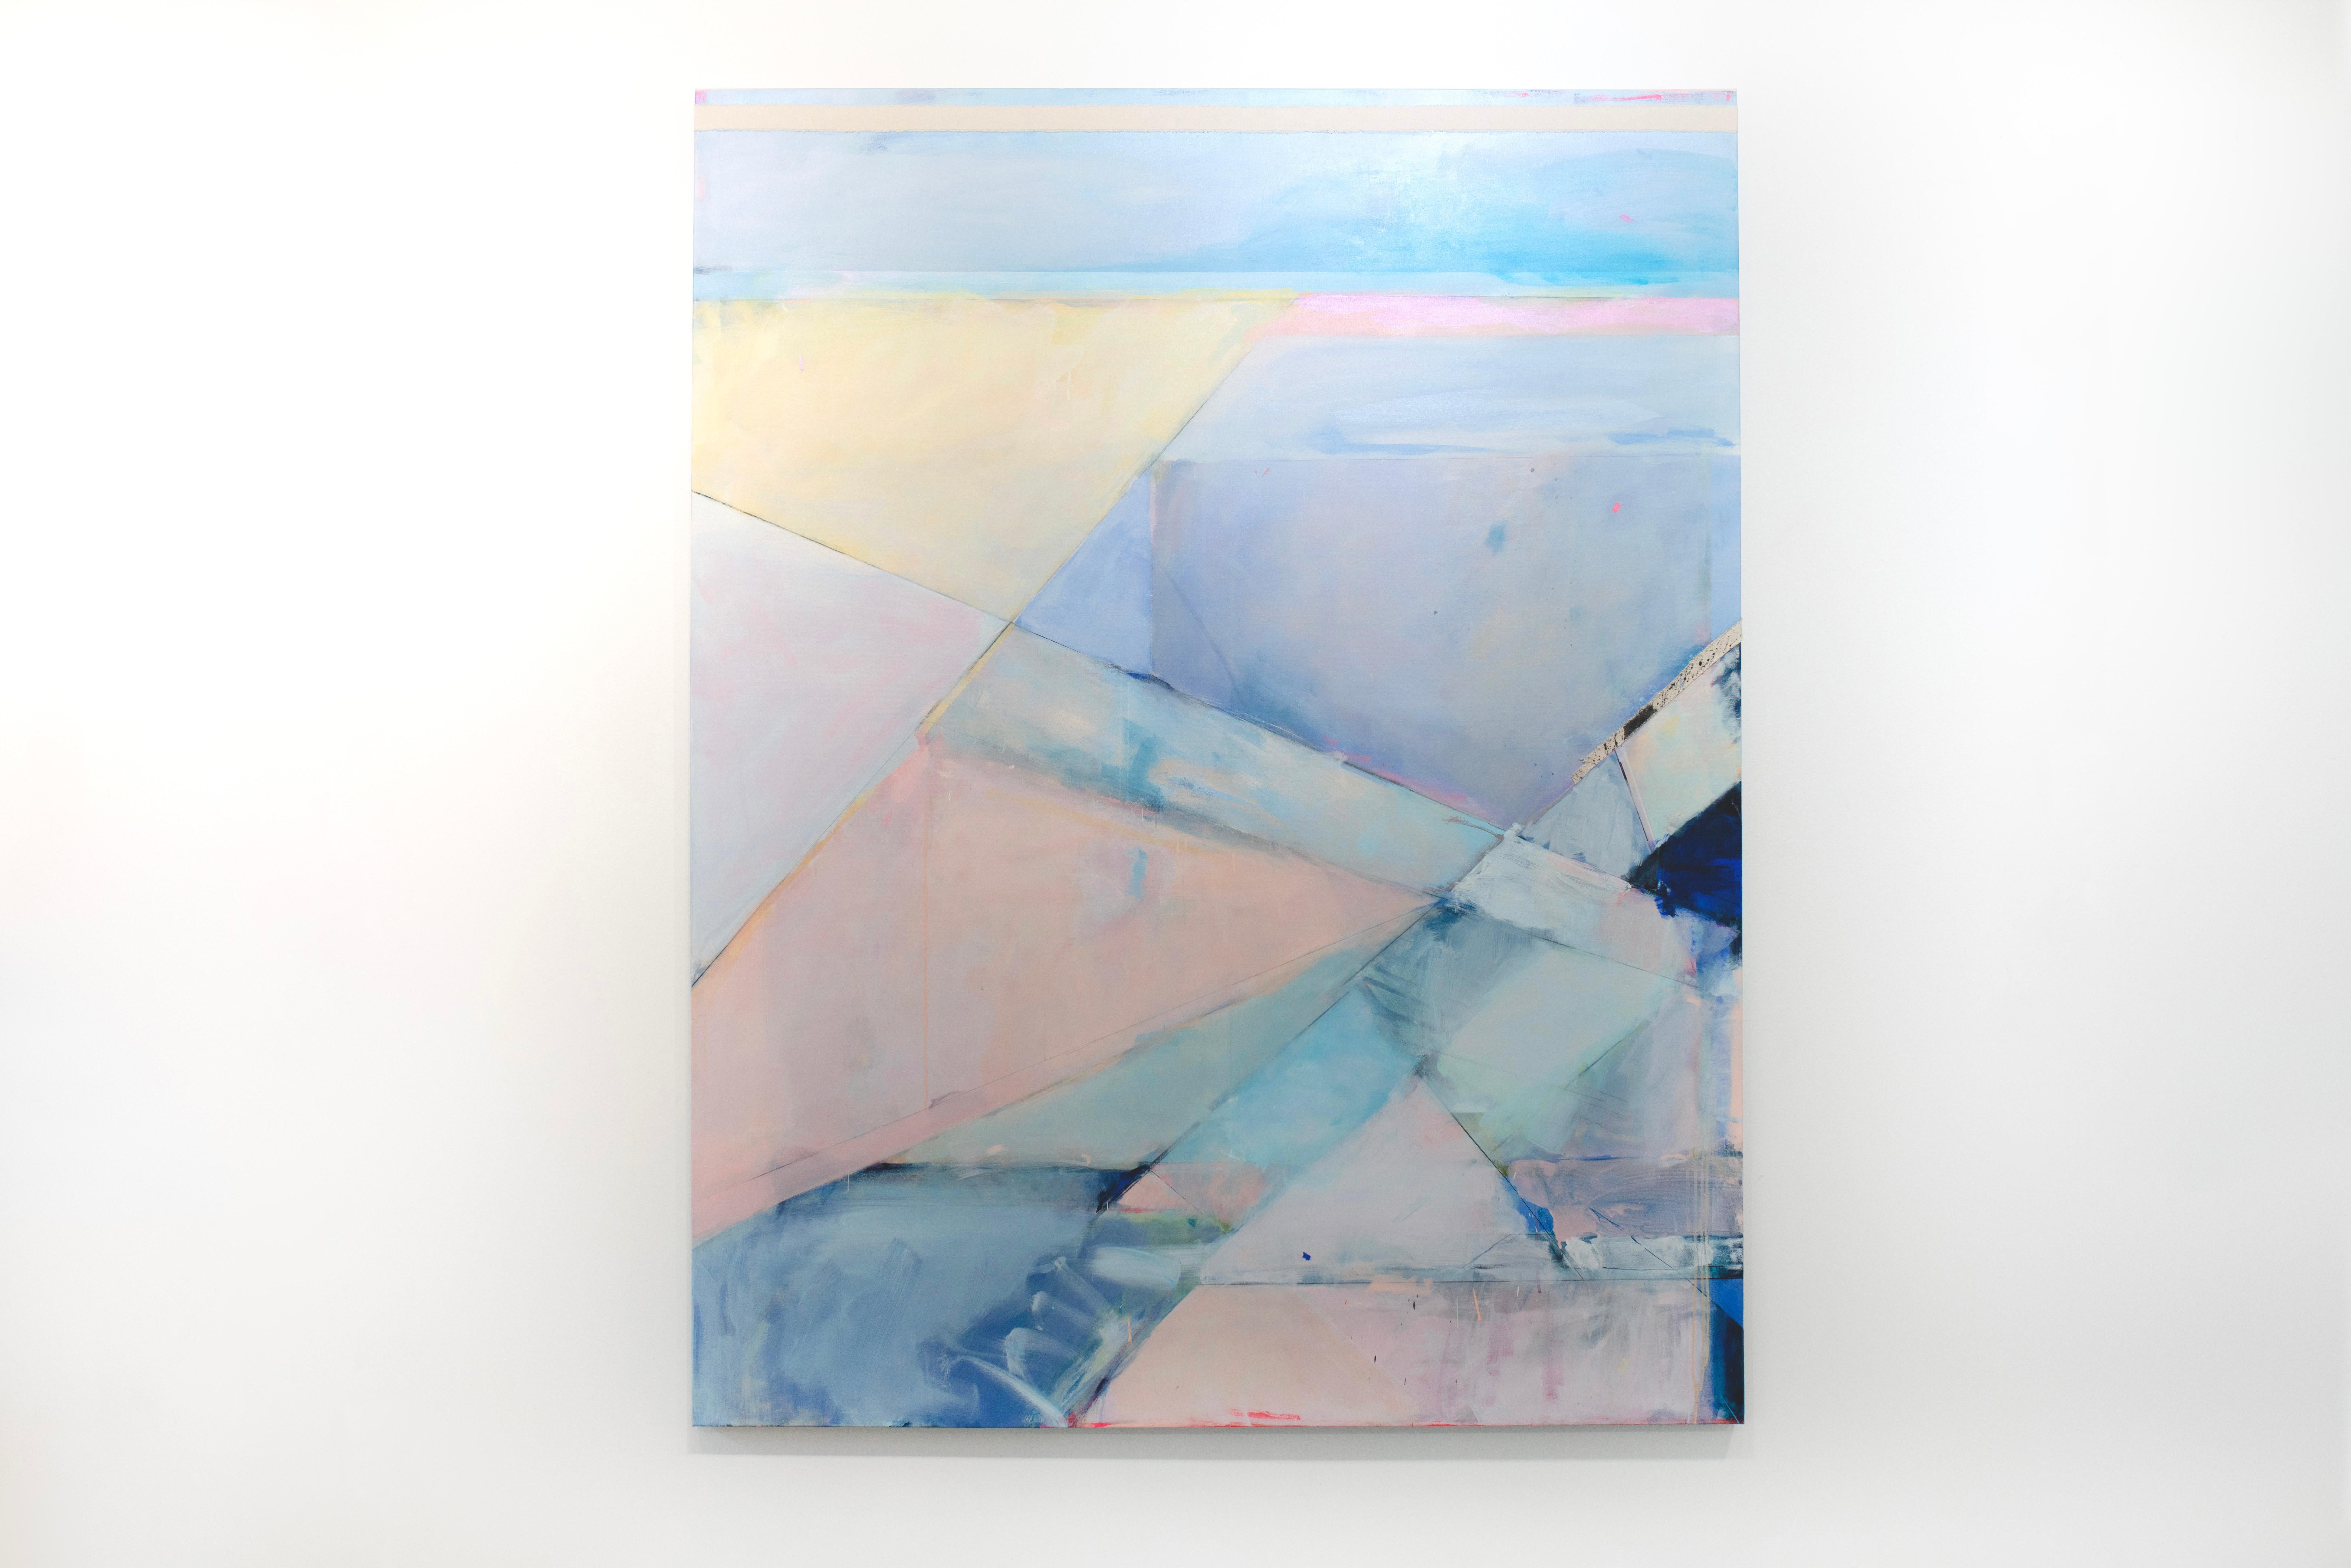 Kelly Rossetti Abstract Painting - "Prisms" Abstract Geometric Painting